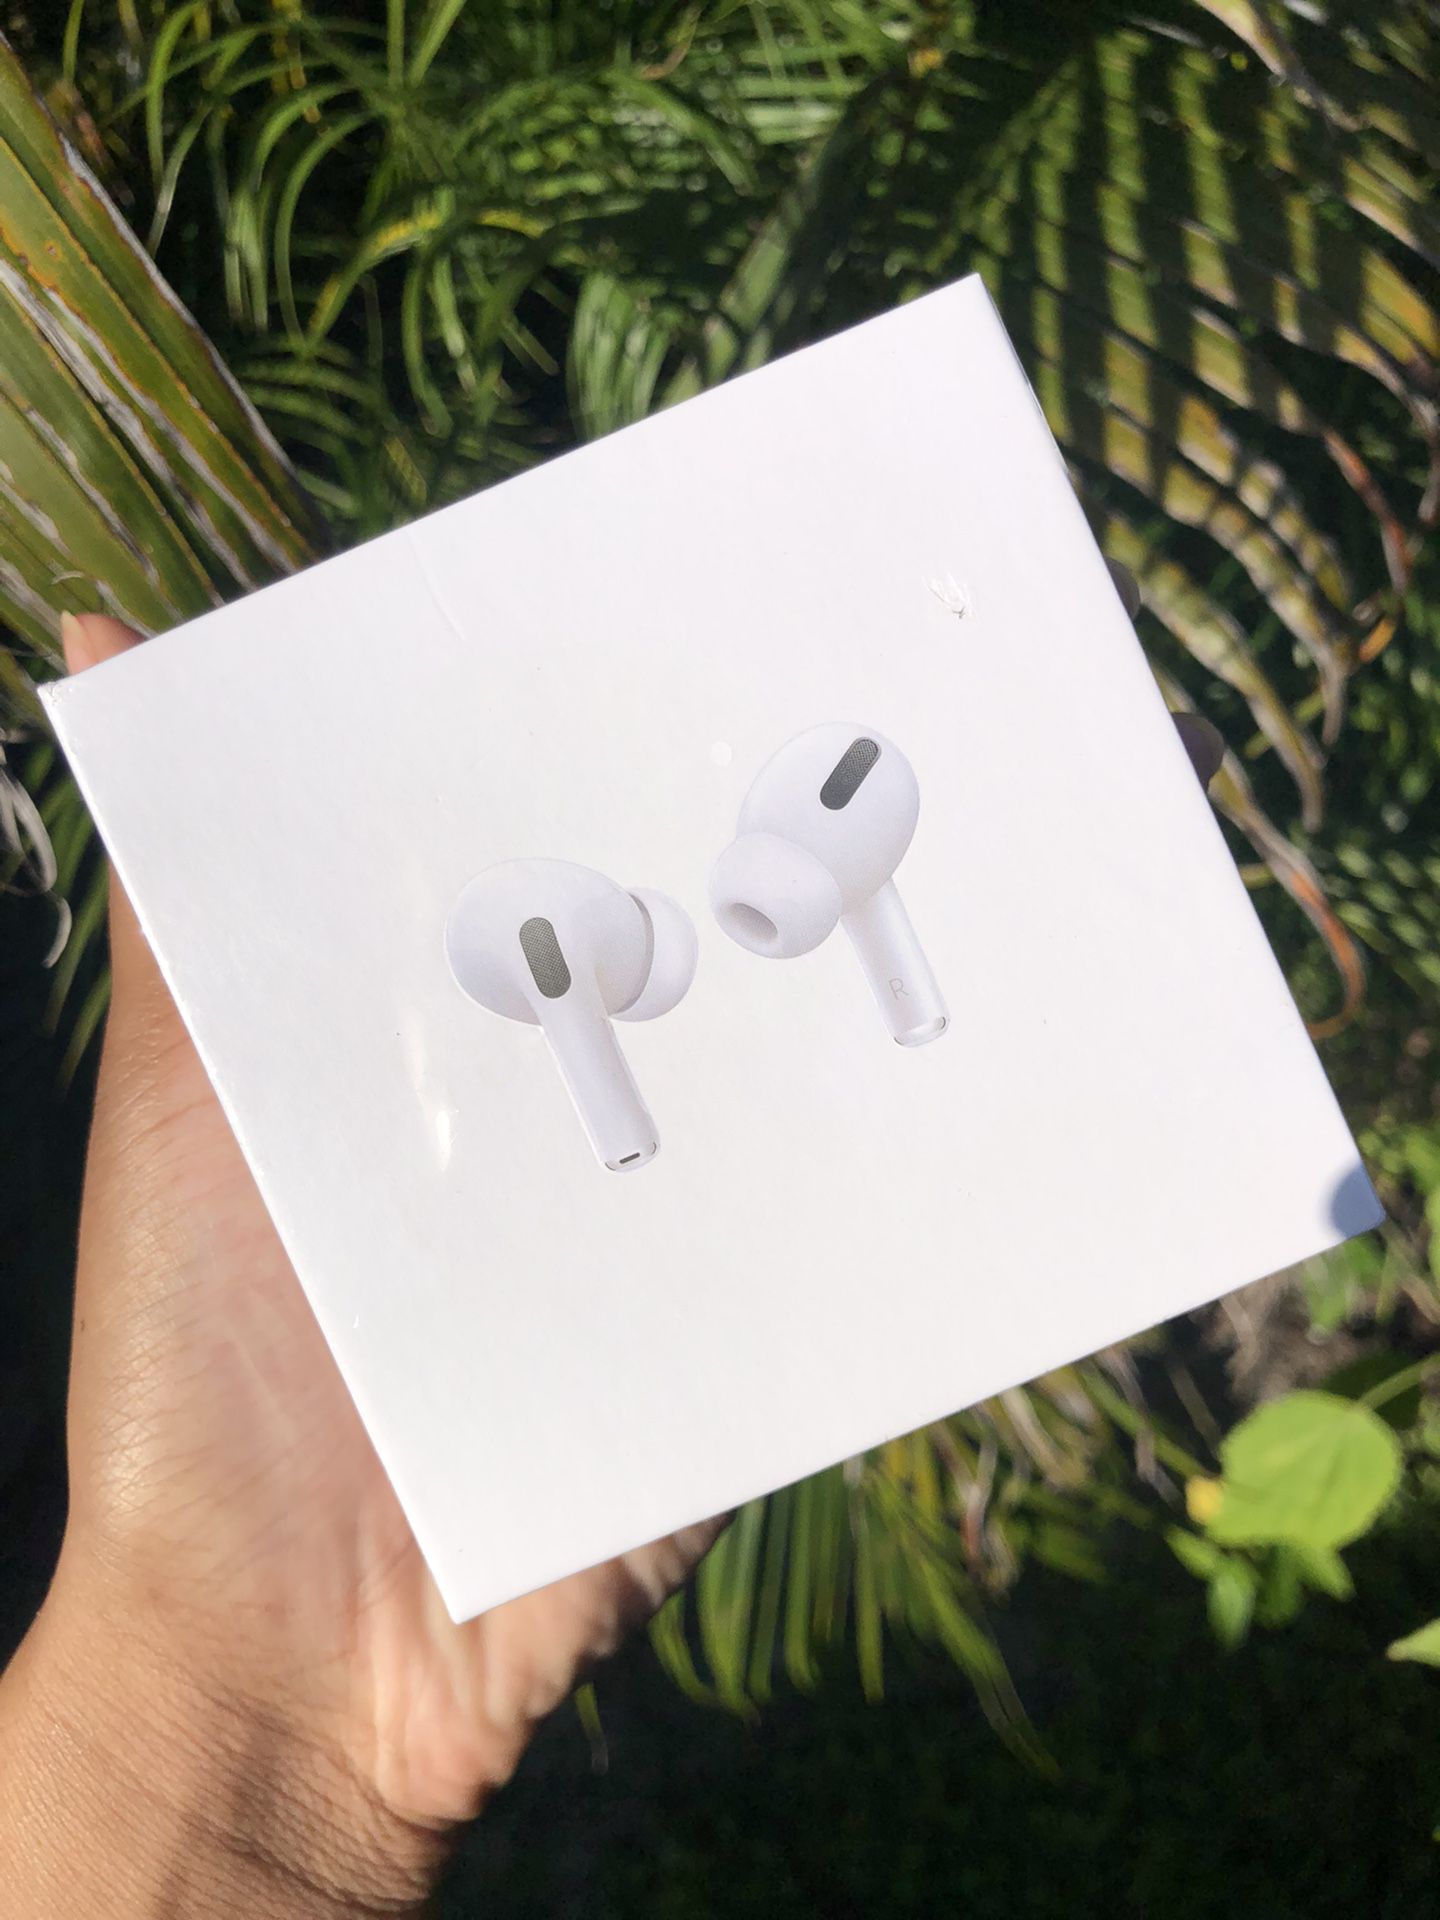 Apple AirPods Pro Wireless In-Ear Headsets - White